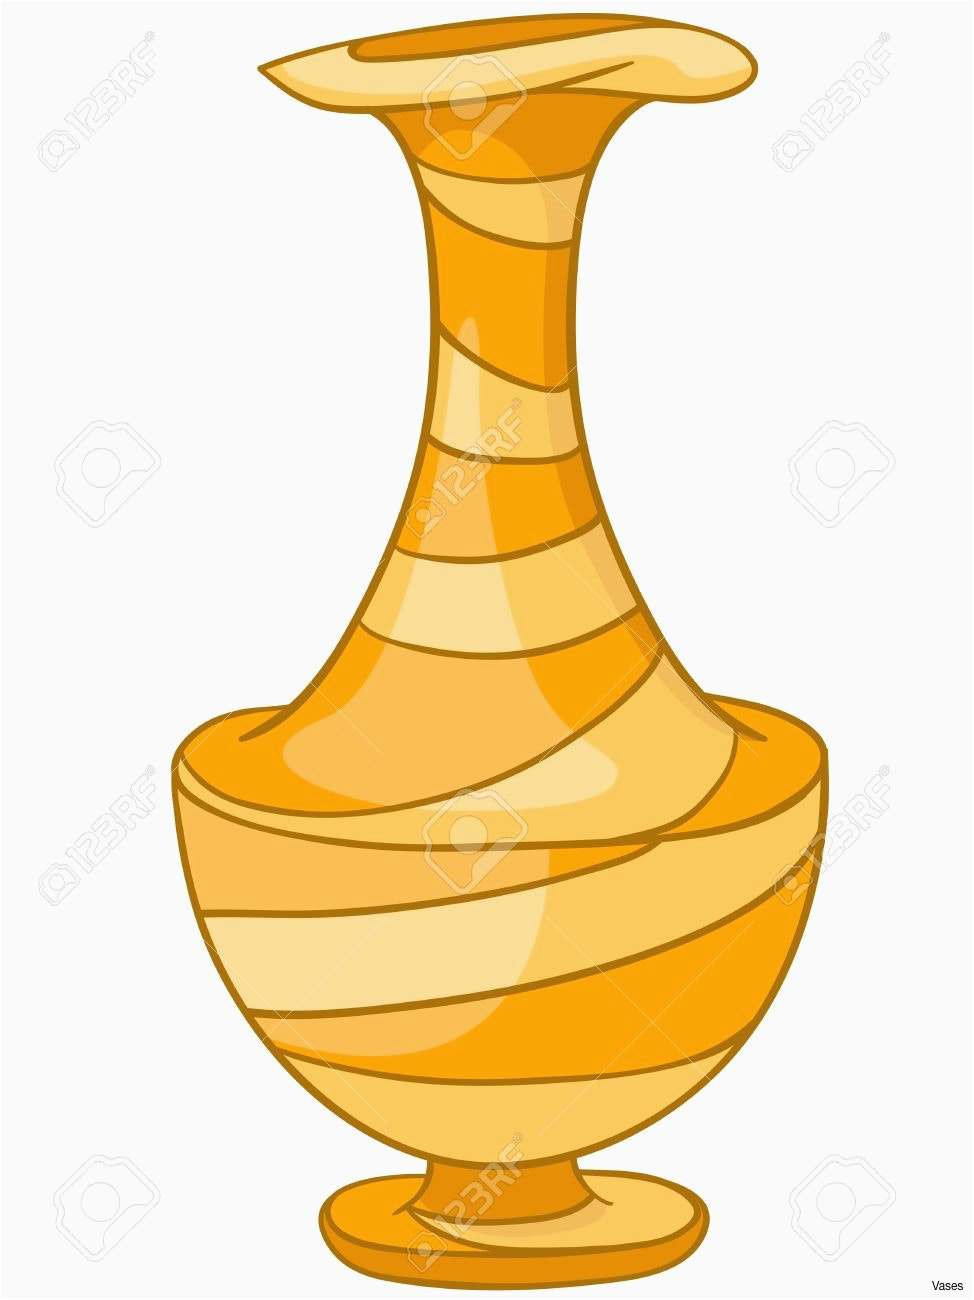 22 Recommended Gold Glass Vase 2024 free download gold glass vase of cliparts new design table legs and bases decor modern also great for cliparts simple elegant will clipart colored flower vase clip arth vases art infoi 0d for your